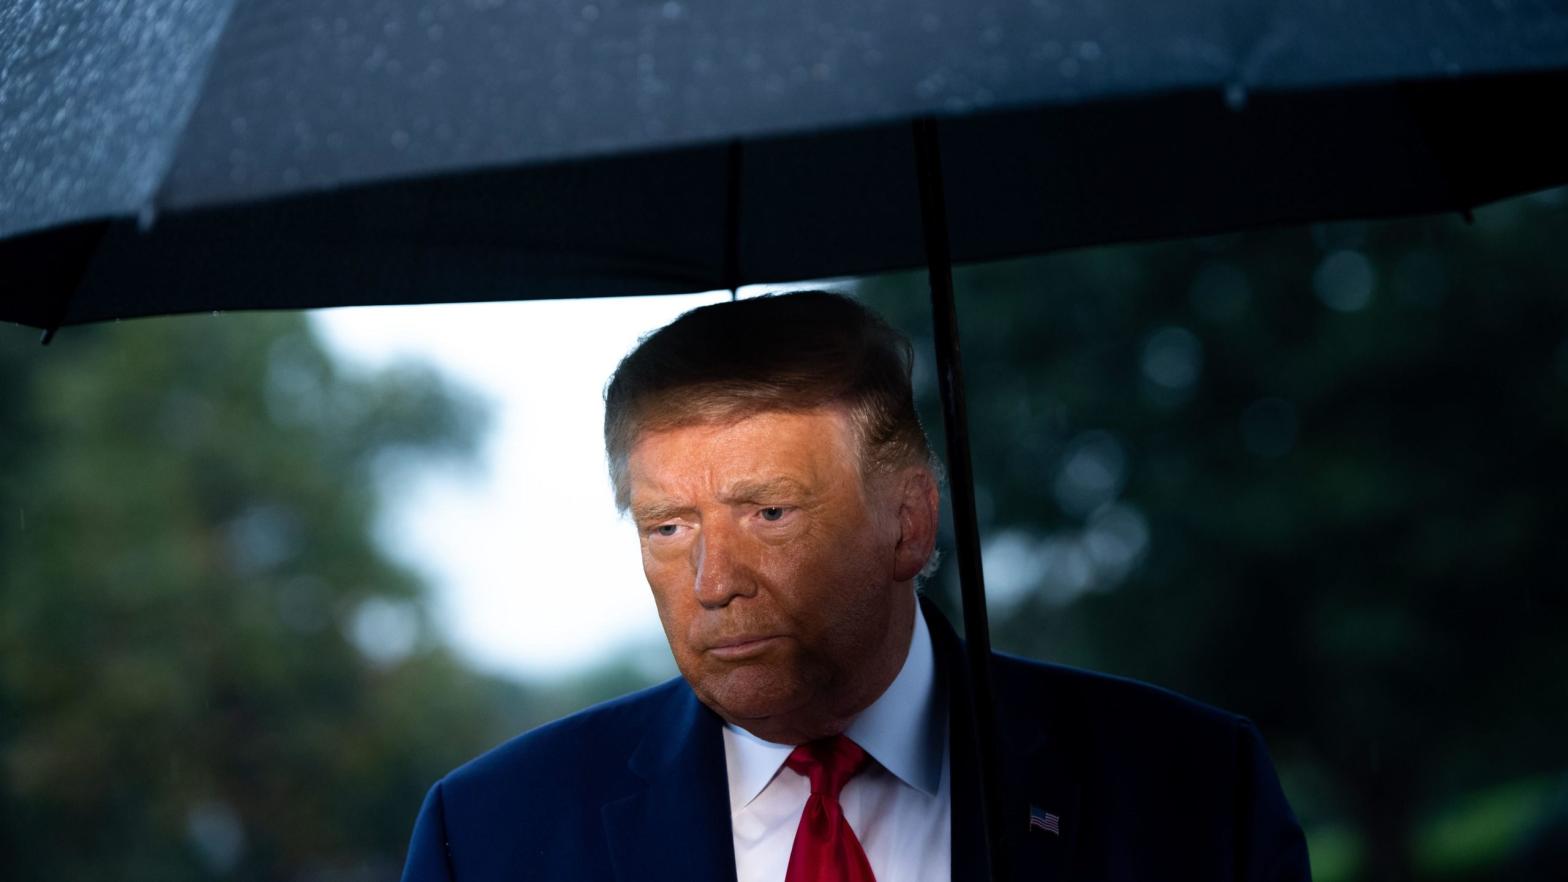 U.S. fascist Donald Trump holds an umbrella at the White House on September 17, 2020. (Photo: Saul Loeb, Getty Images)